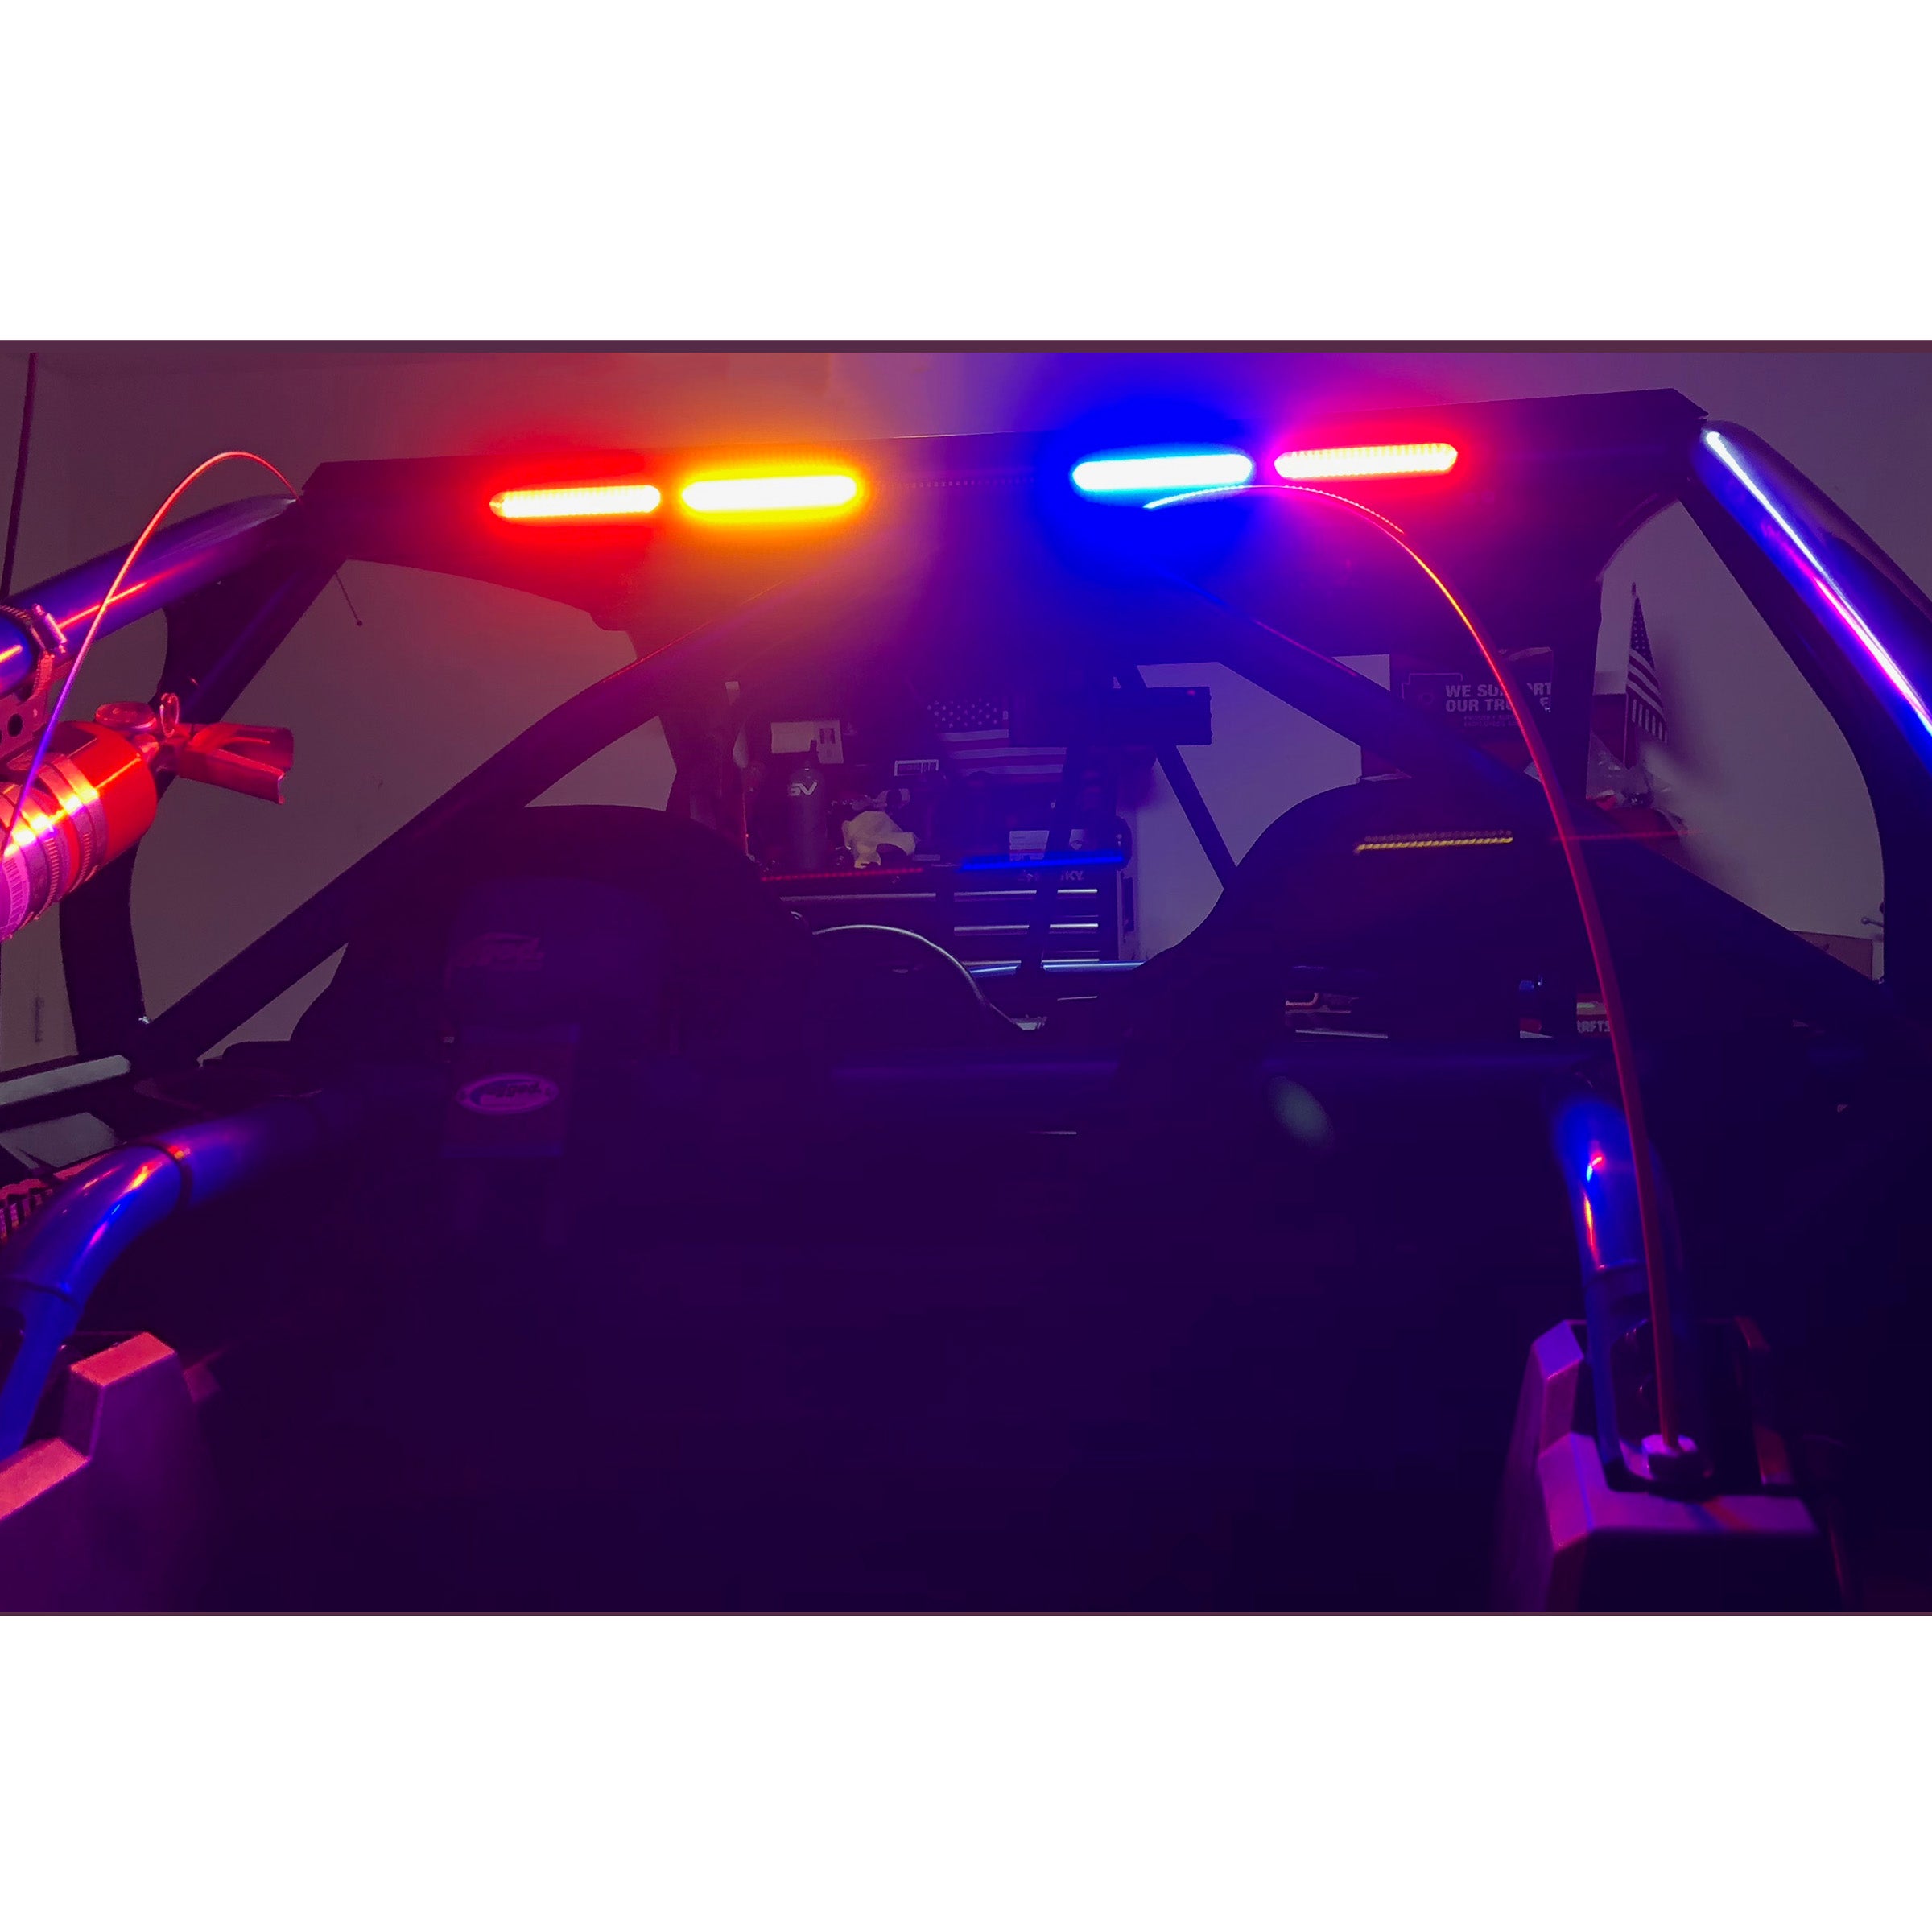 litt industries led chase bar rear facing light bar for utv rzr can am truck or overlander with 1.75" roll bar clamps mounted to polaris rzr turbo S